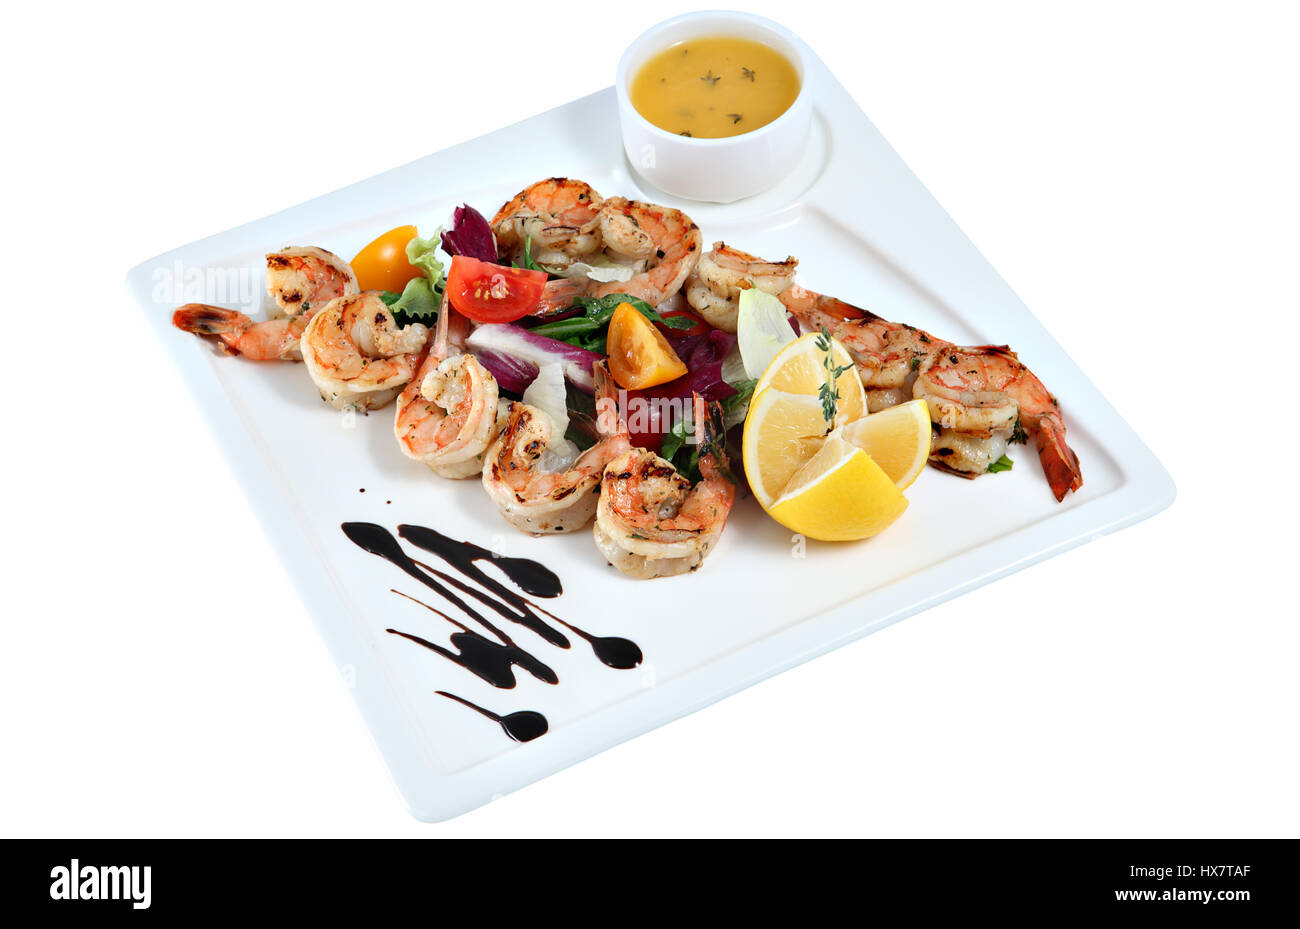 Shrimp grilled with vegetables, lemon and sauce on white square serving platter, isolated on white background. Stock Photo